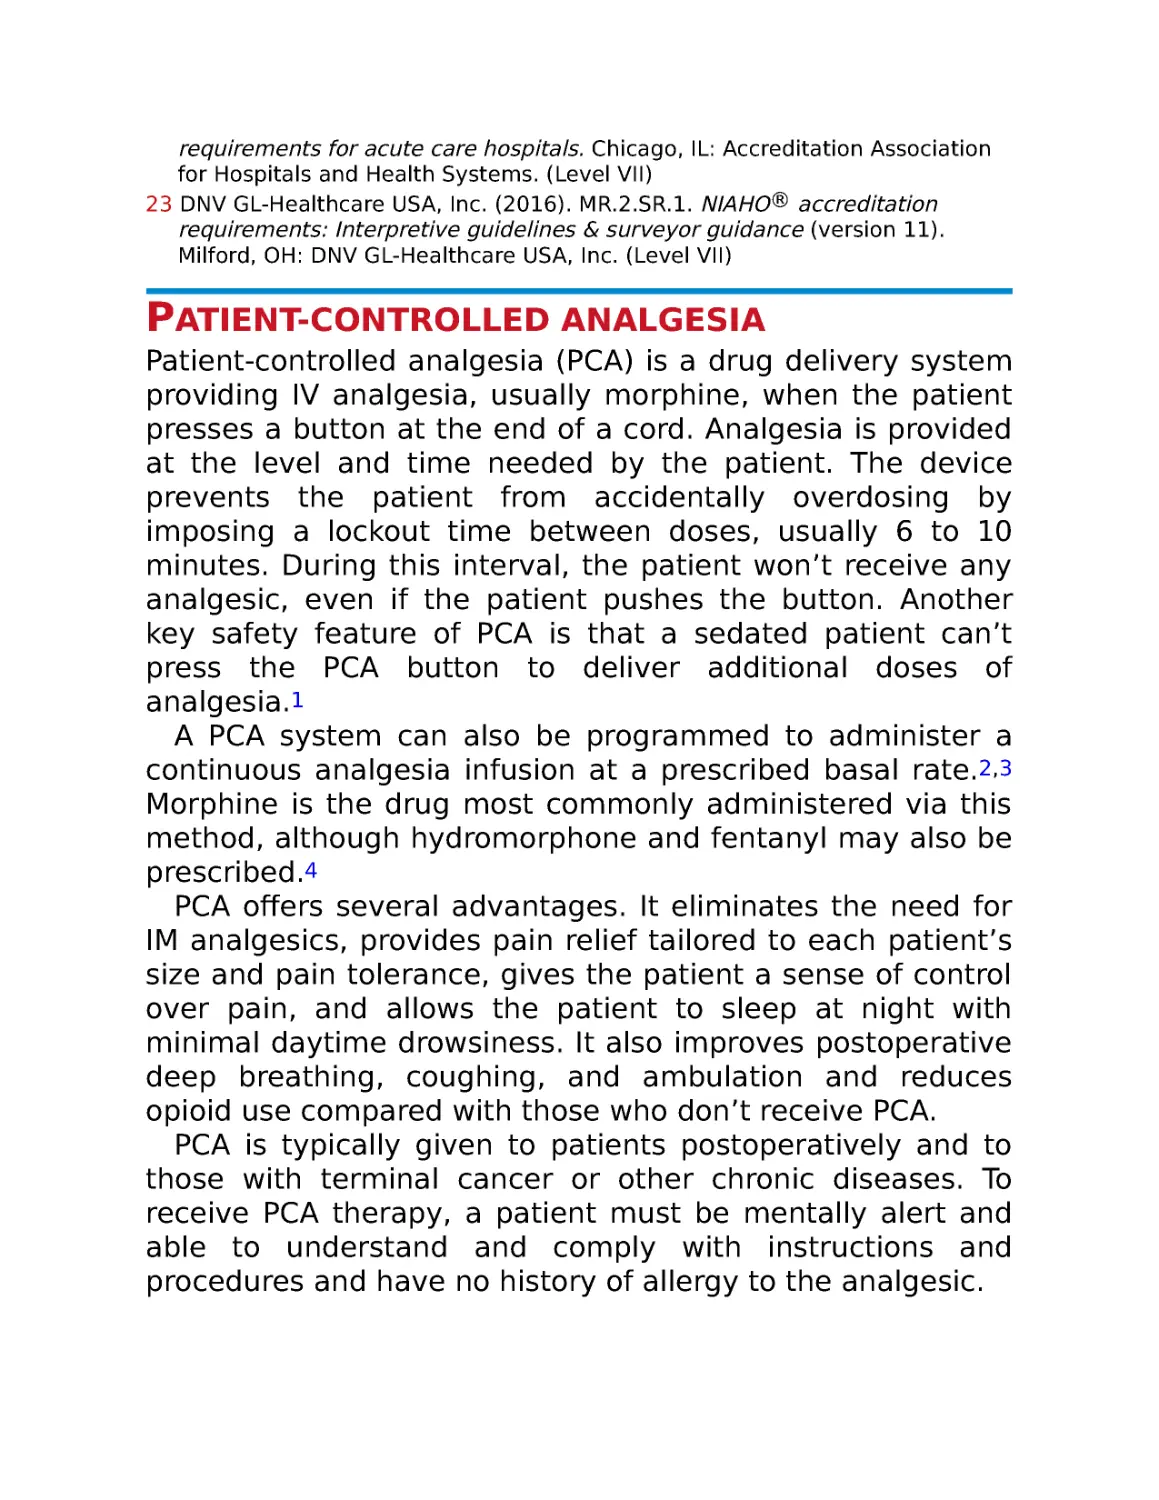 Patient-controlled analgesia